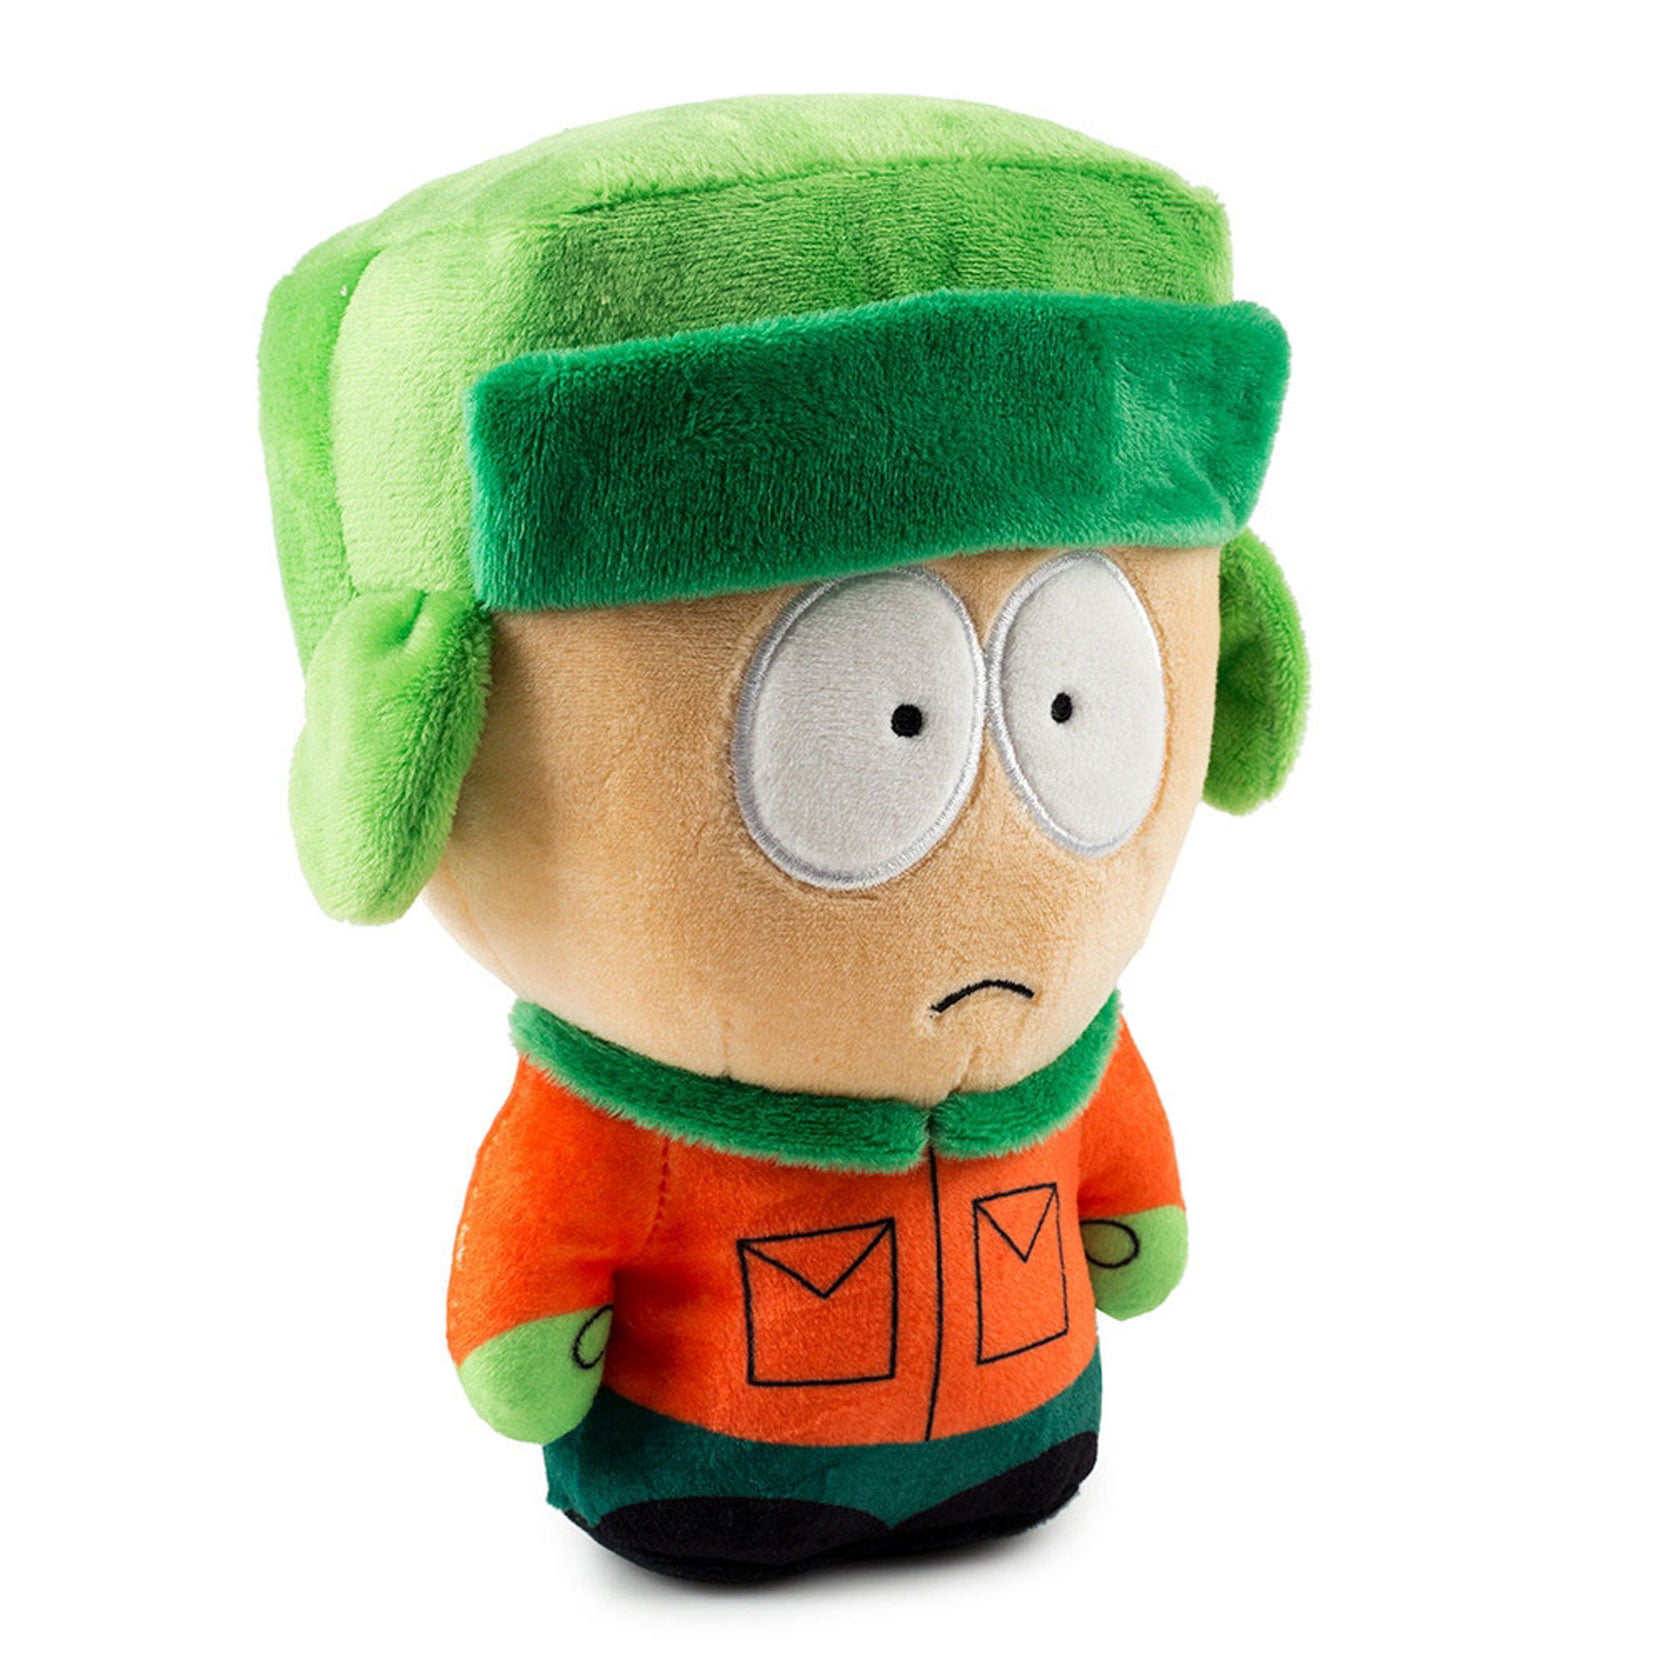 New South Park Plush Toy Kyle Plush Toy Large 9 inches Rare